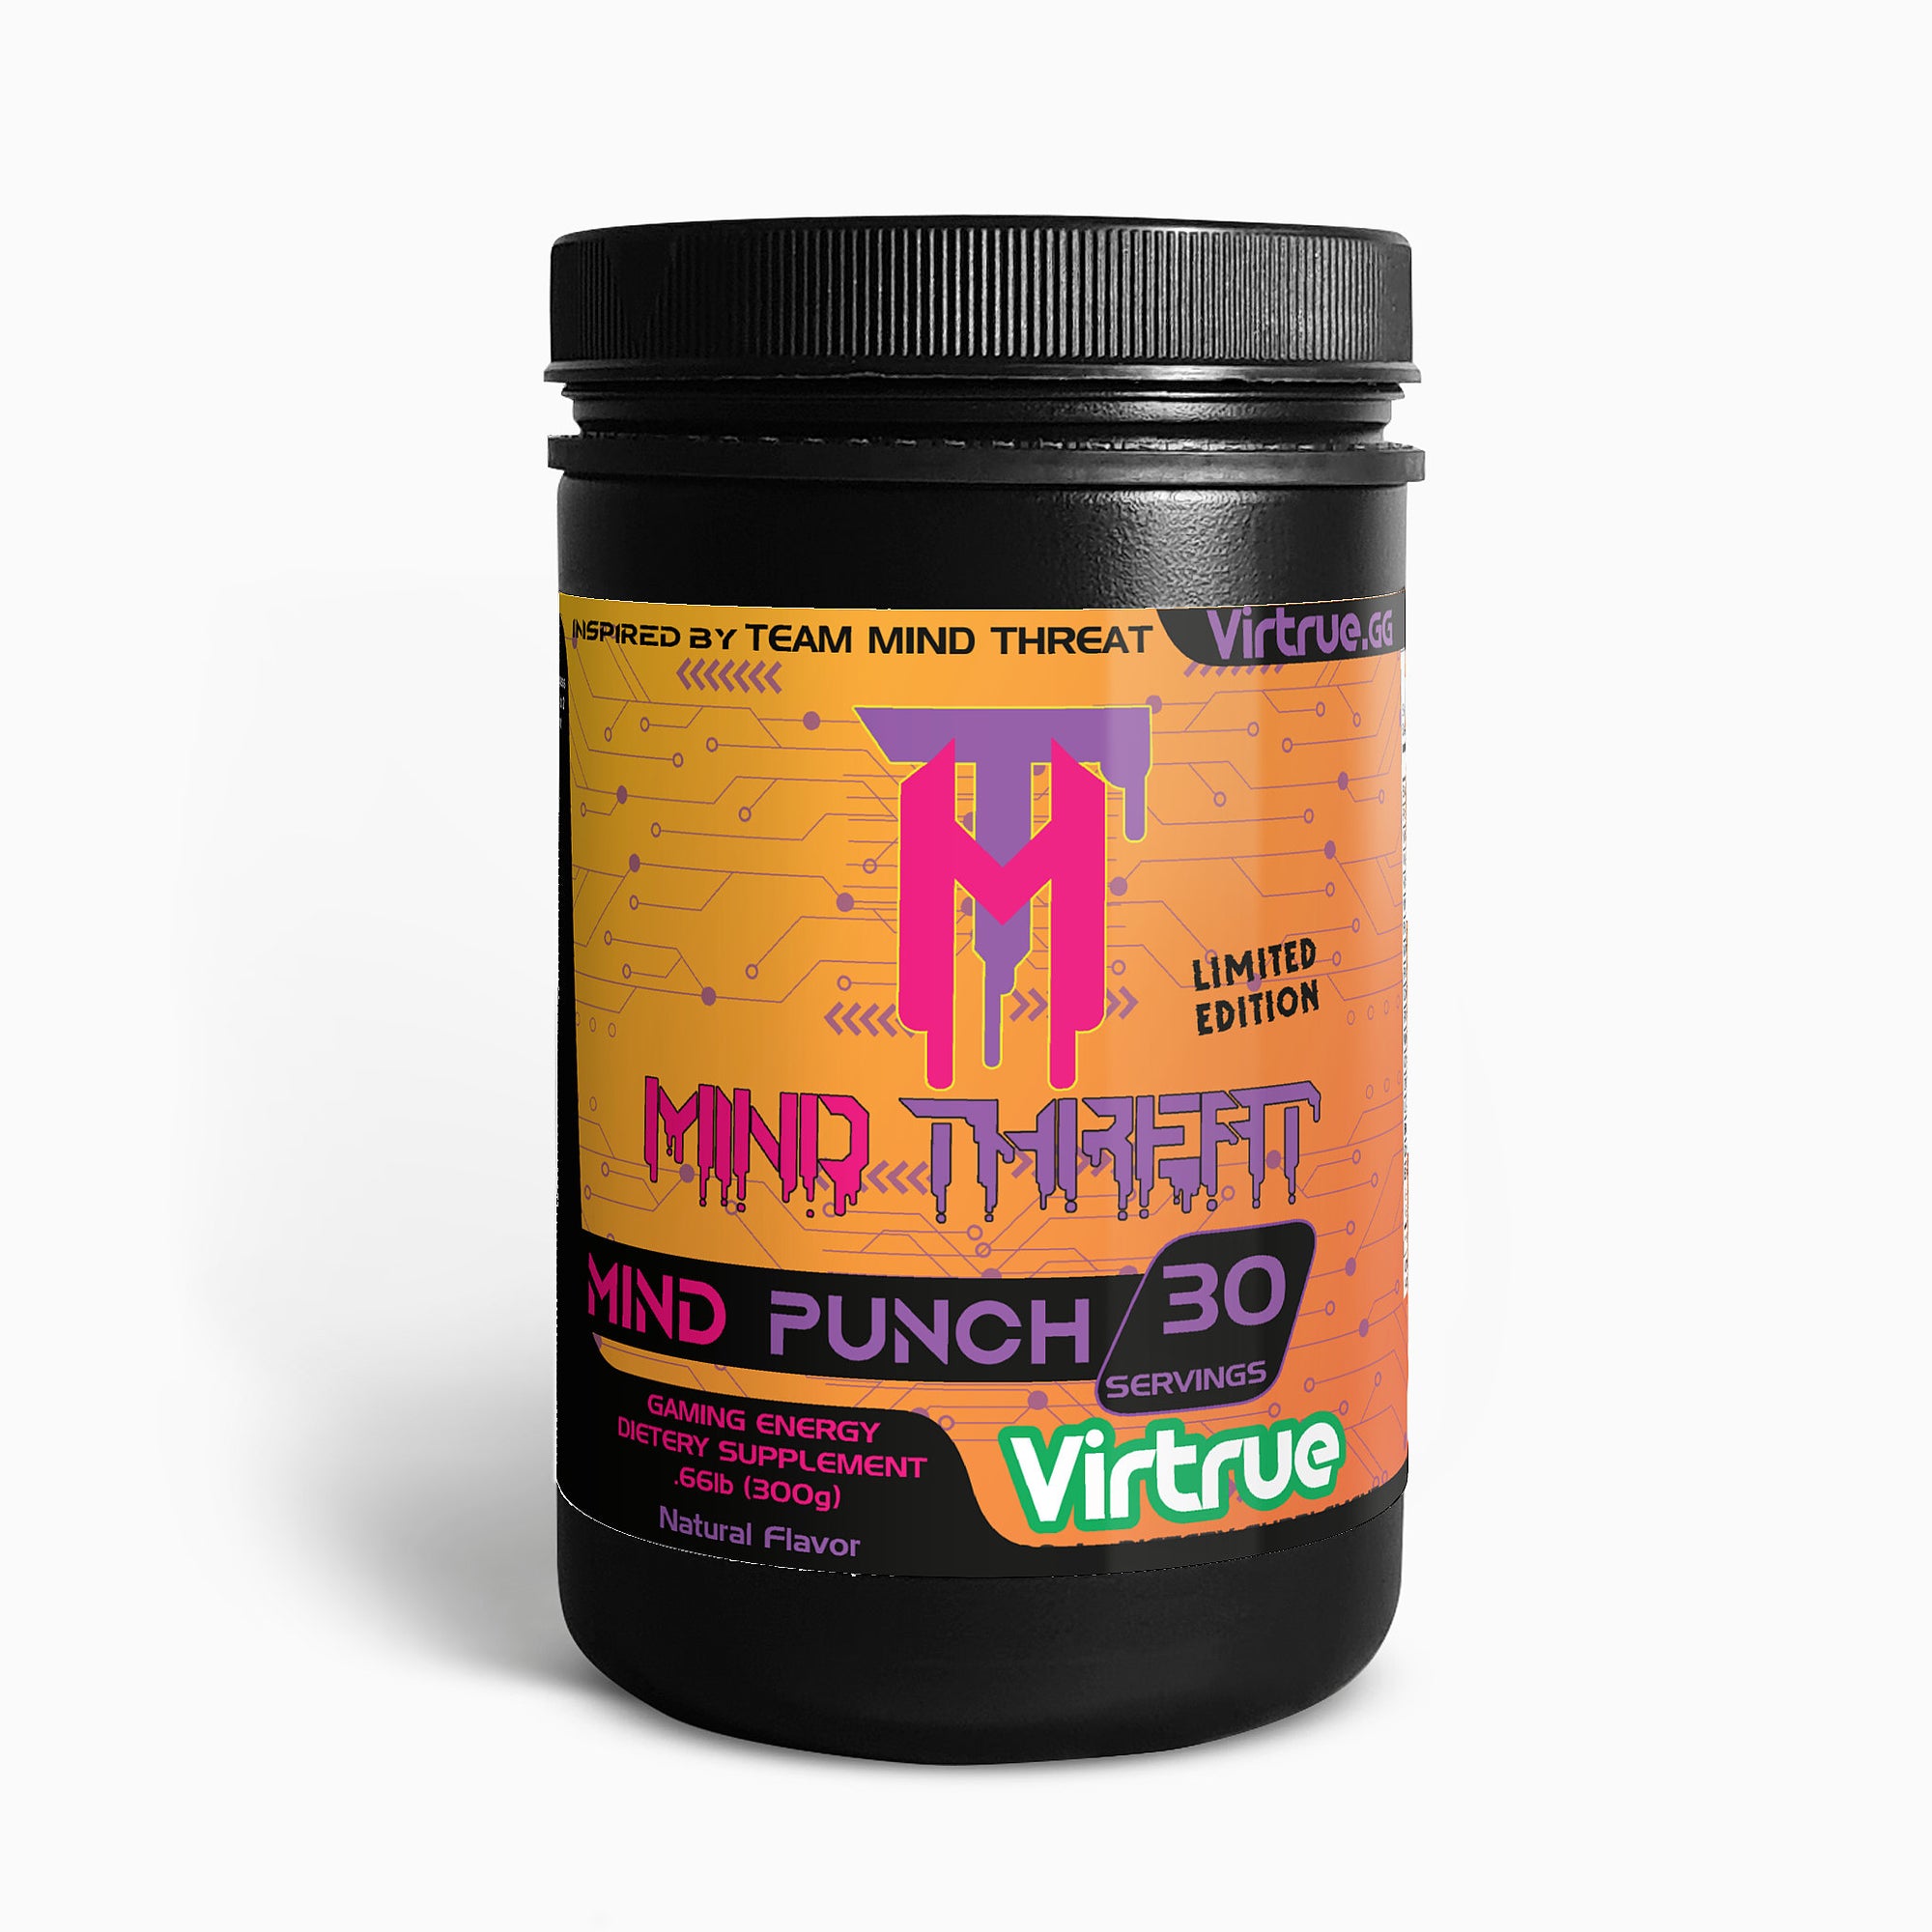 Mind Punch Energy Tub - Inspired by Team Mind Threat